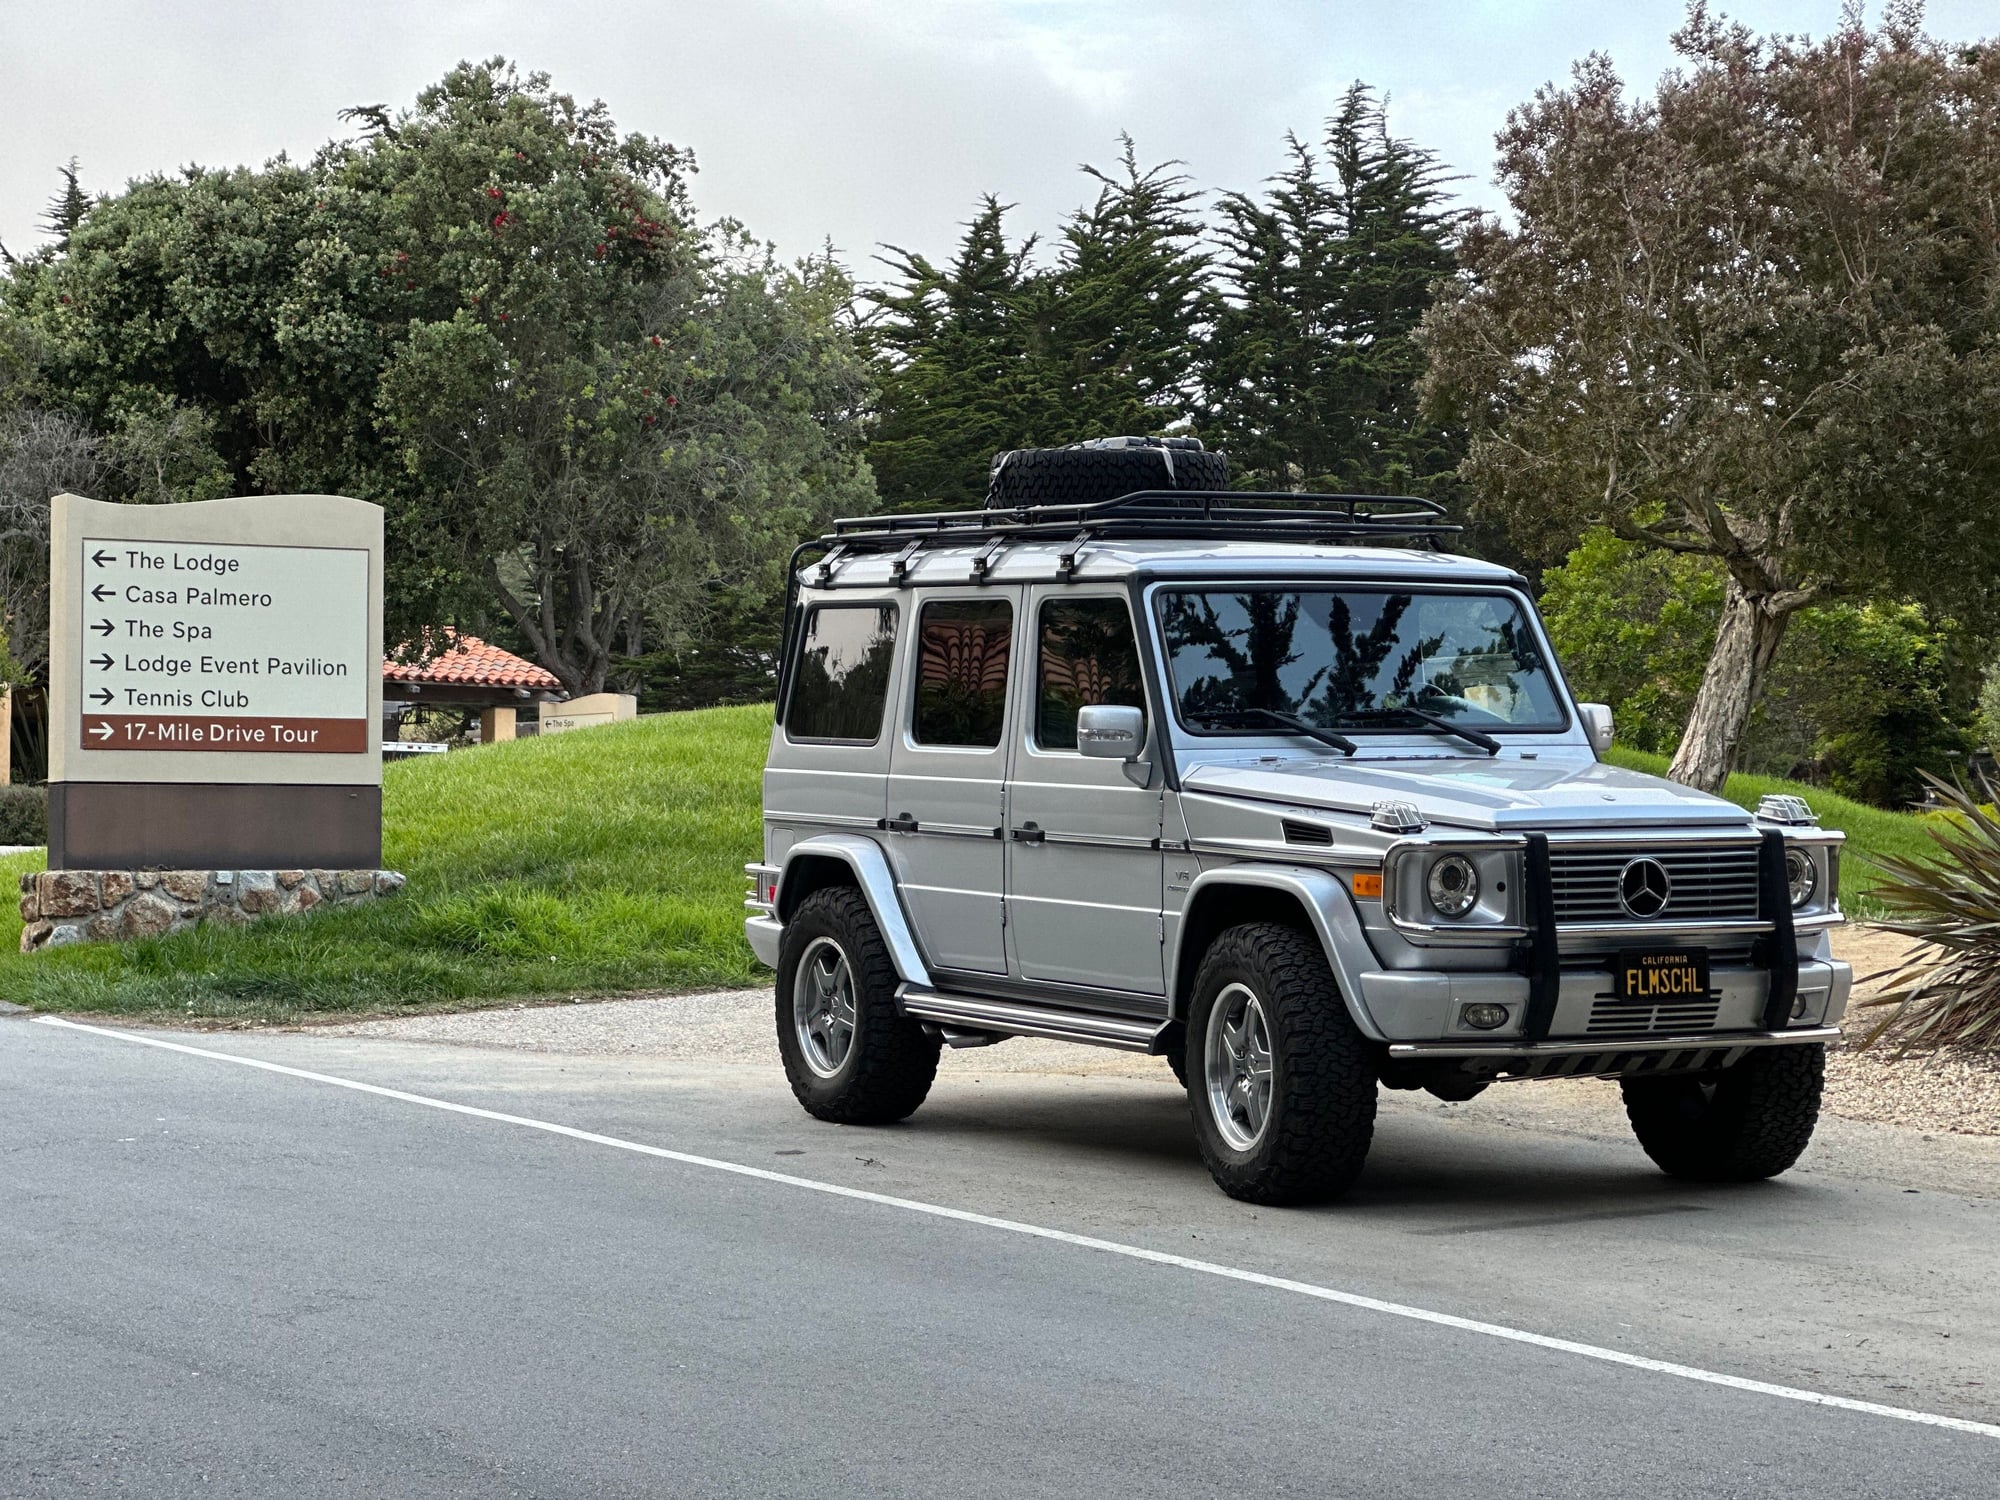 2008 Mercedes-Benz G55 AMG - 2008 G55 AMG For Sale - Used - VIN WDCYR71E88X171247 - 95,000 Miles - 8 cyl - AWD - Automatic - SUV - Silver - Los Angeles, CA 90026, United States